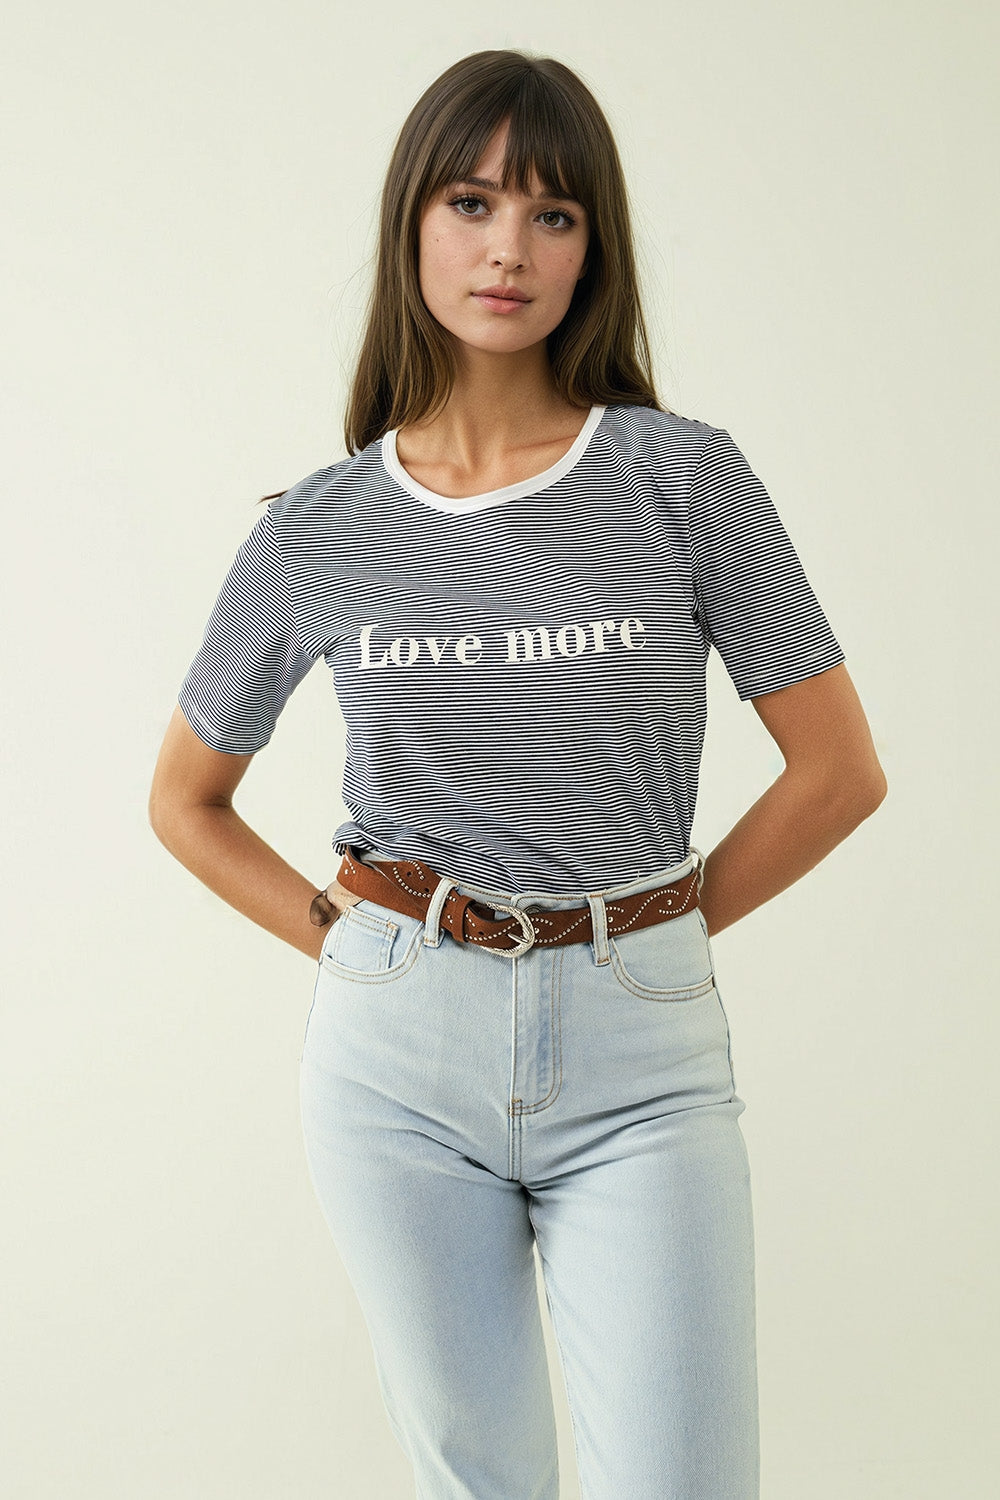 Q2 White T-shirt with black stripes and Love More texted